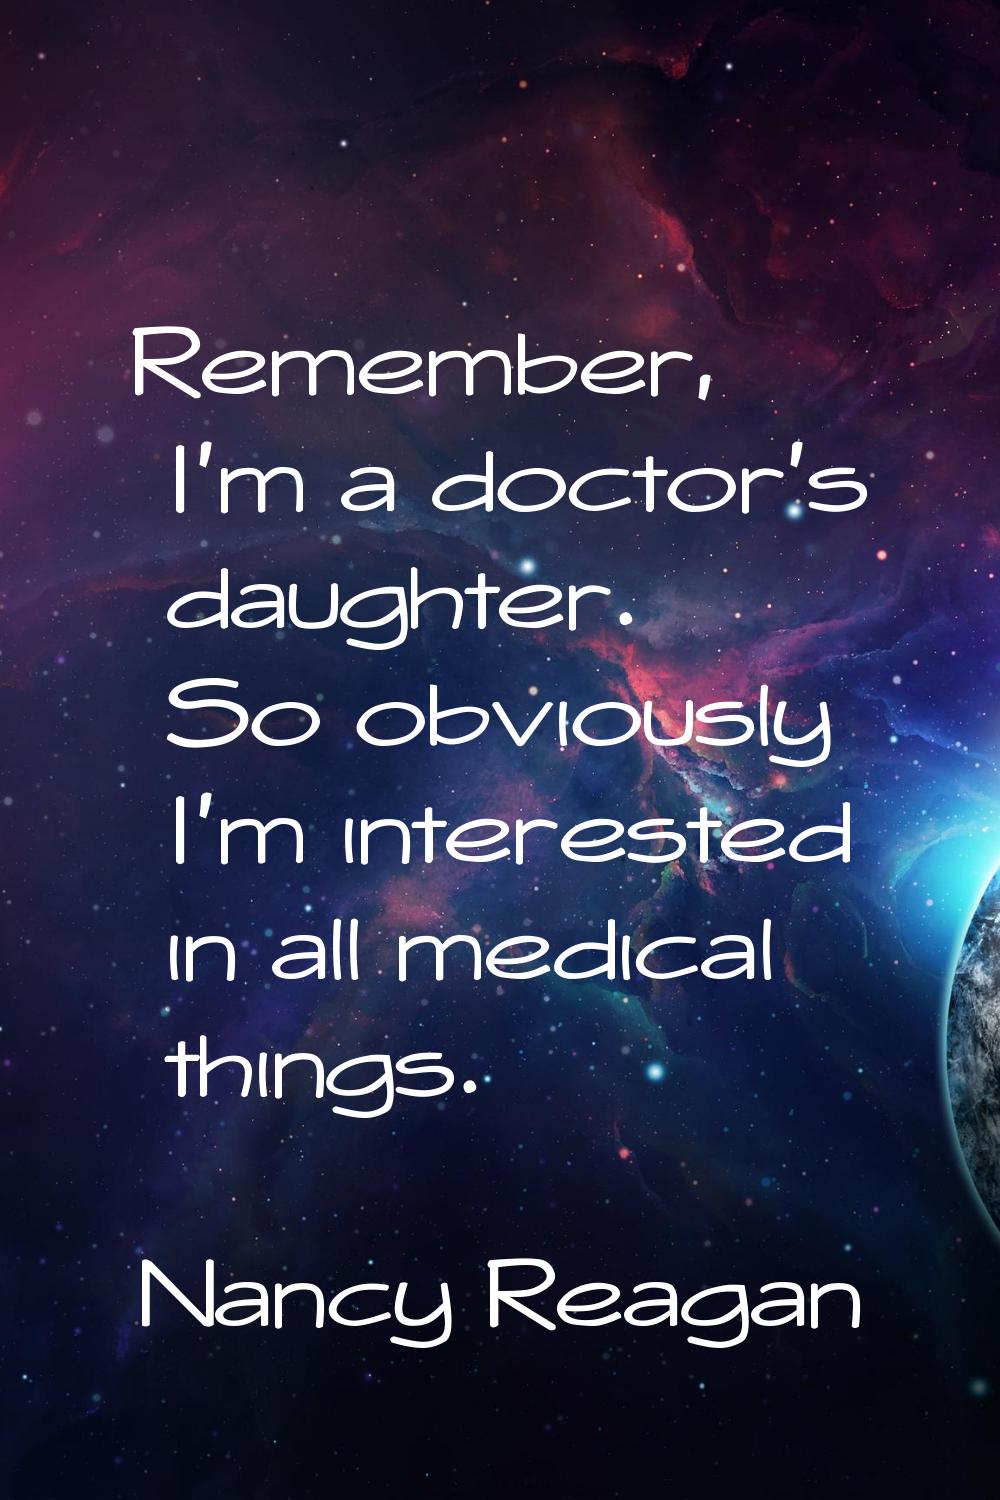 Remember, I'm a doctor's daughter. So obviously I'm interested in all medical things.